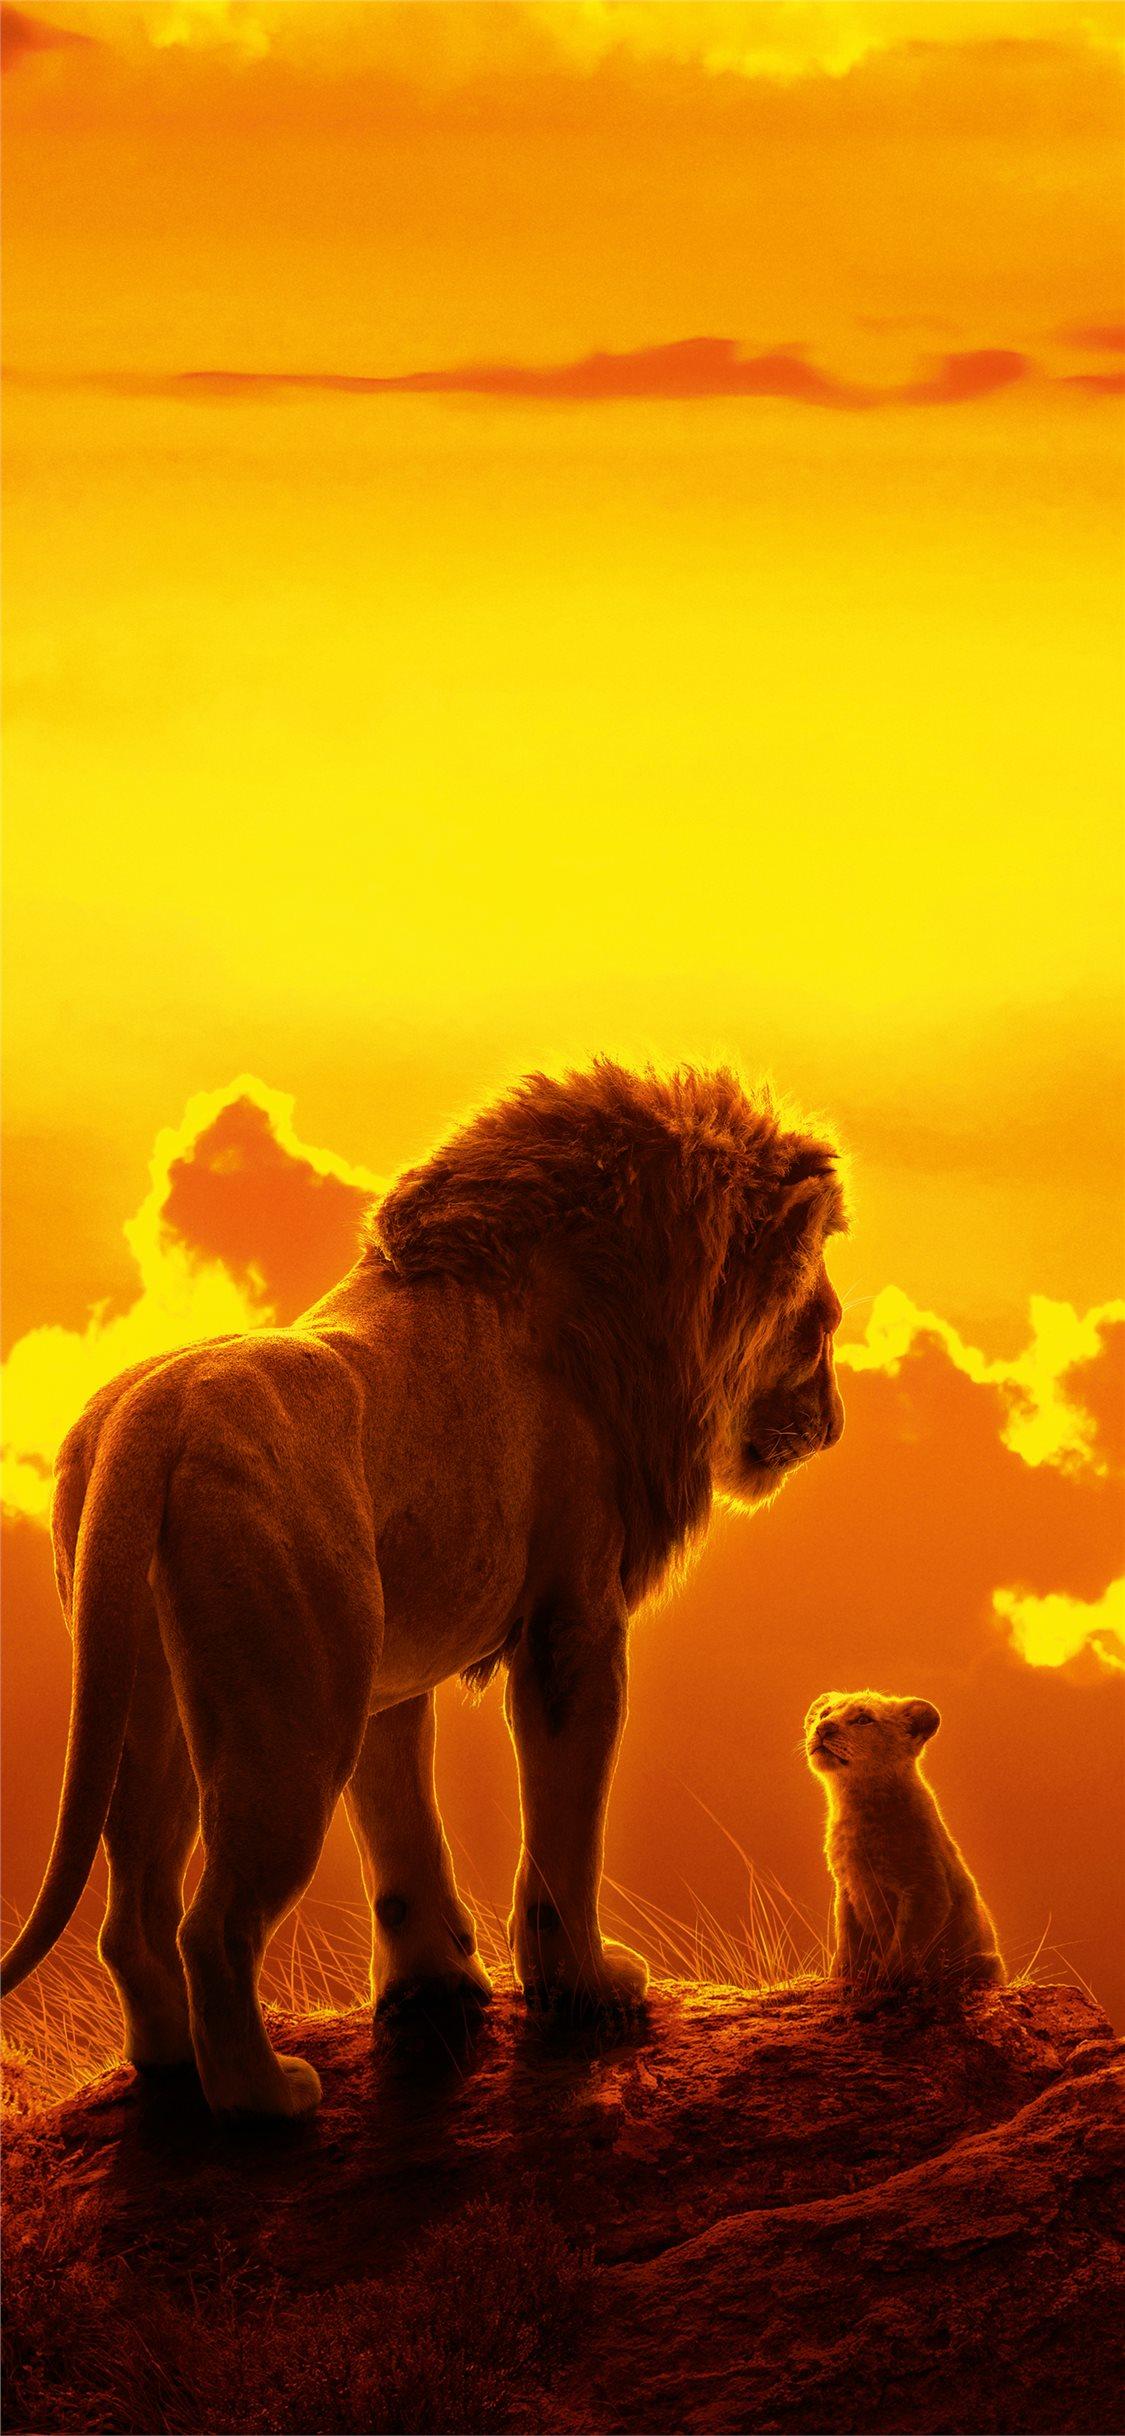 the lion king movie 8k iPhone Wallpaper Free Download